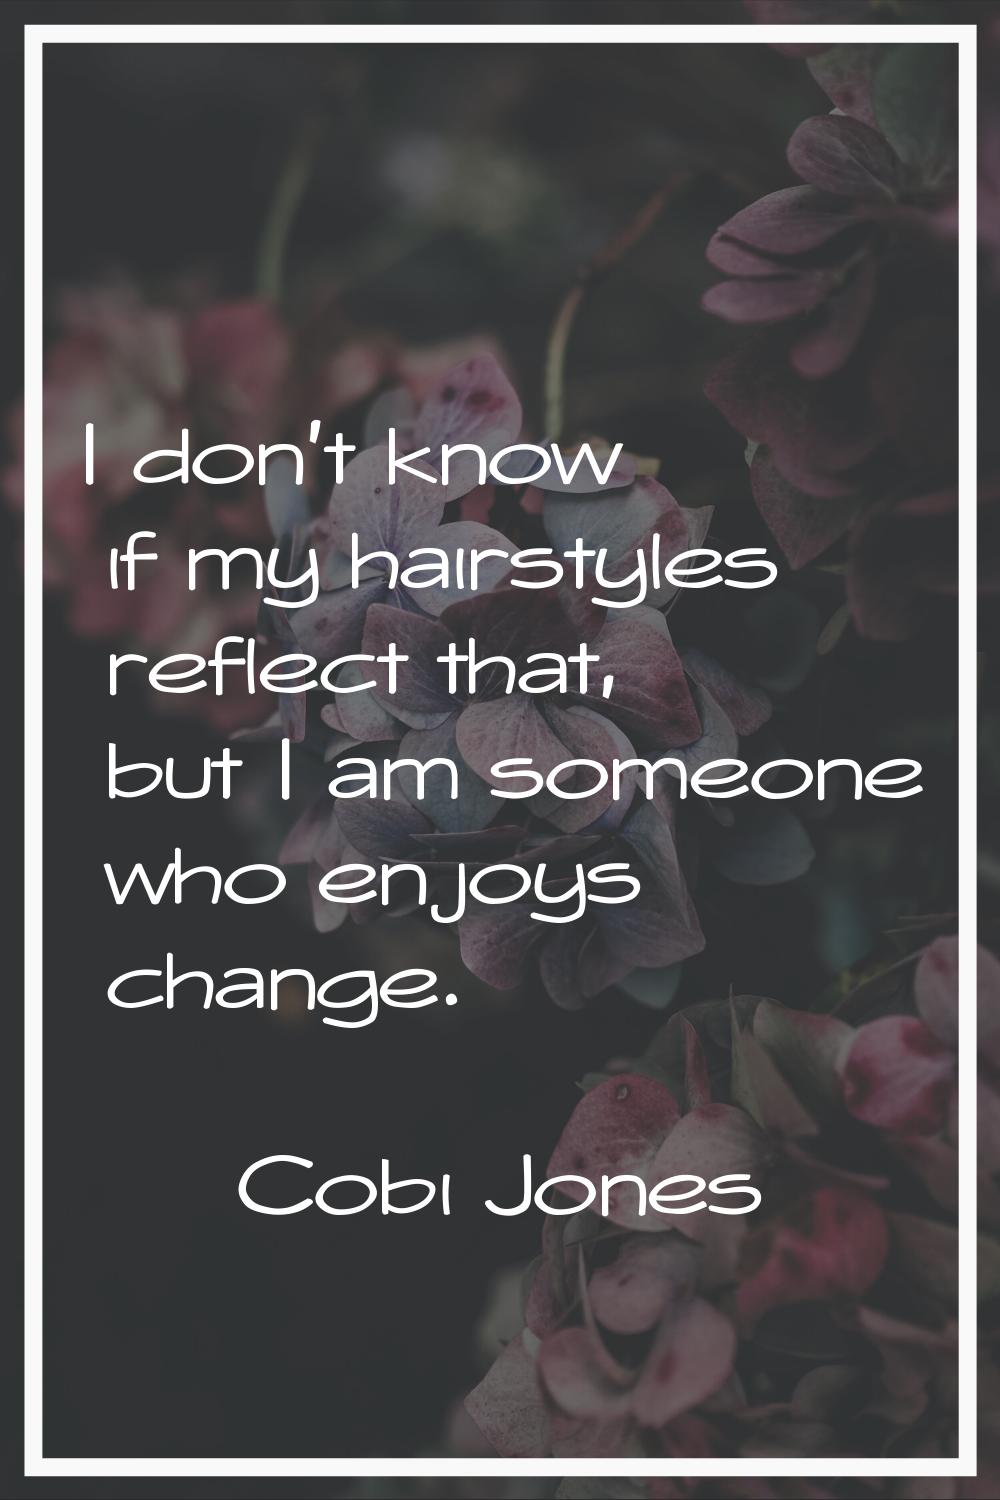 I don't know if my hairstyles reflect that, but I am someone who enjoys change.